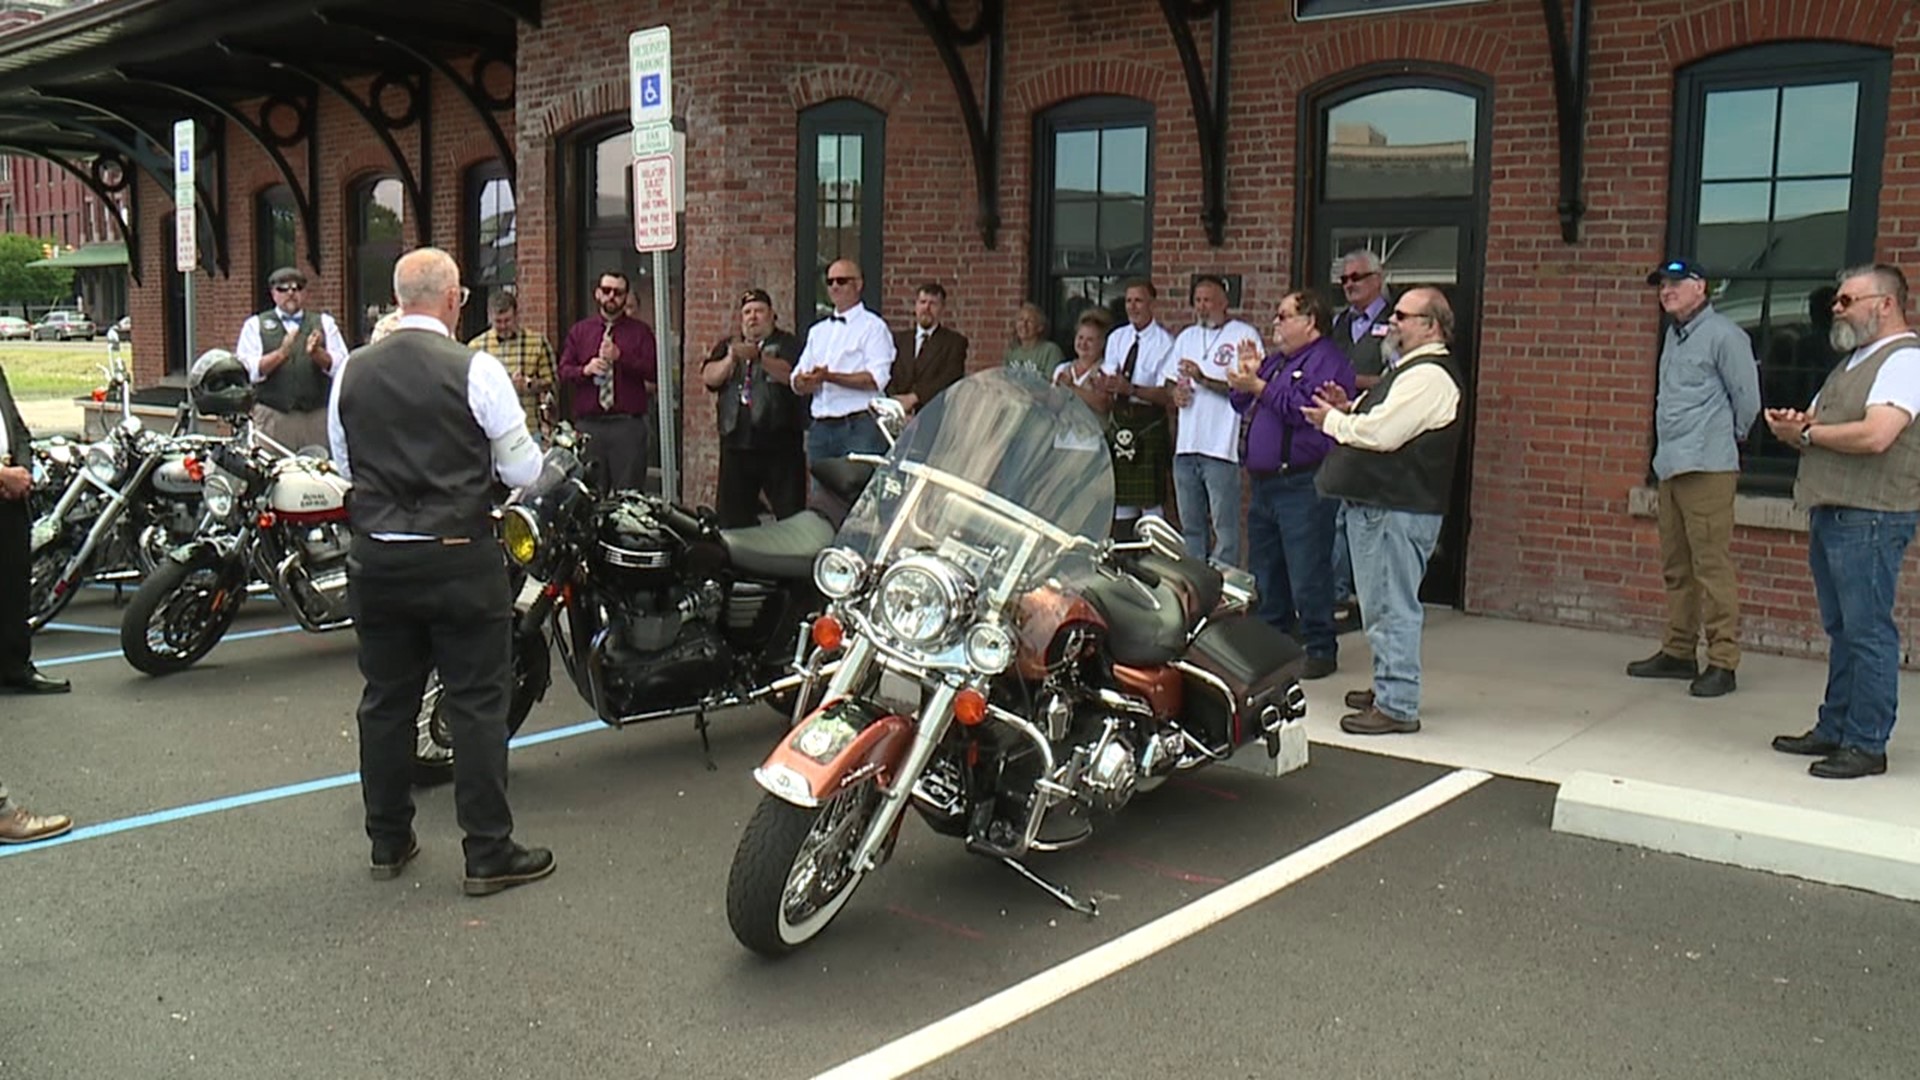 The ride began at the Luzerne County Visitors Center at 11 a.m. Sunday.